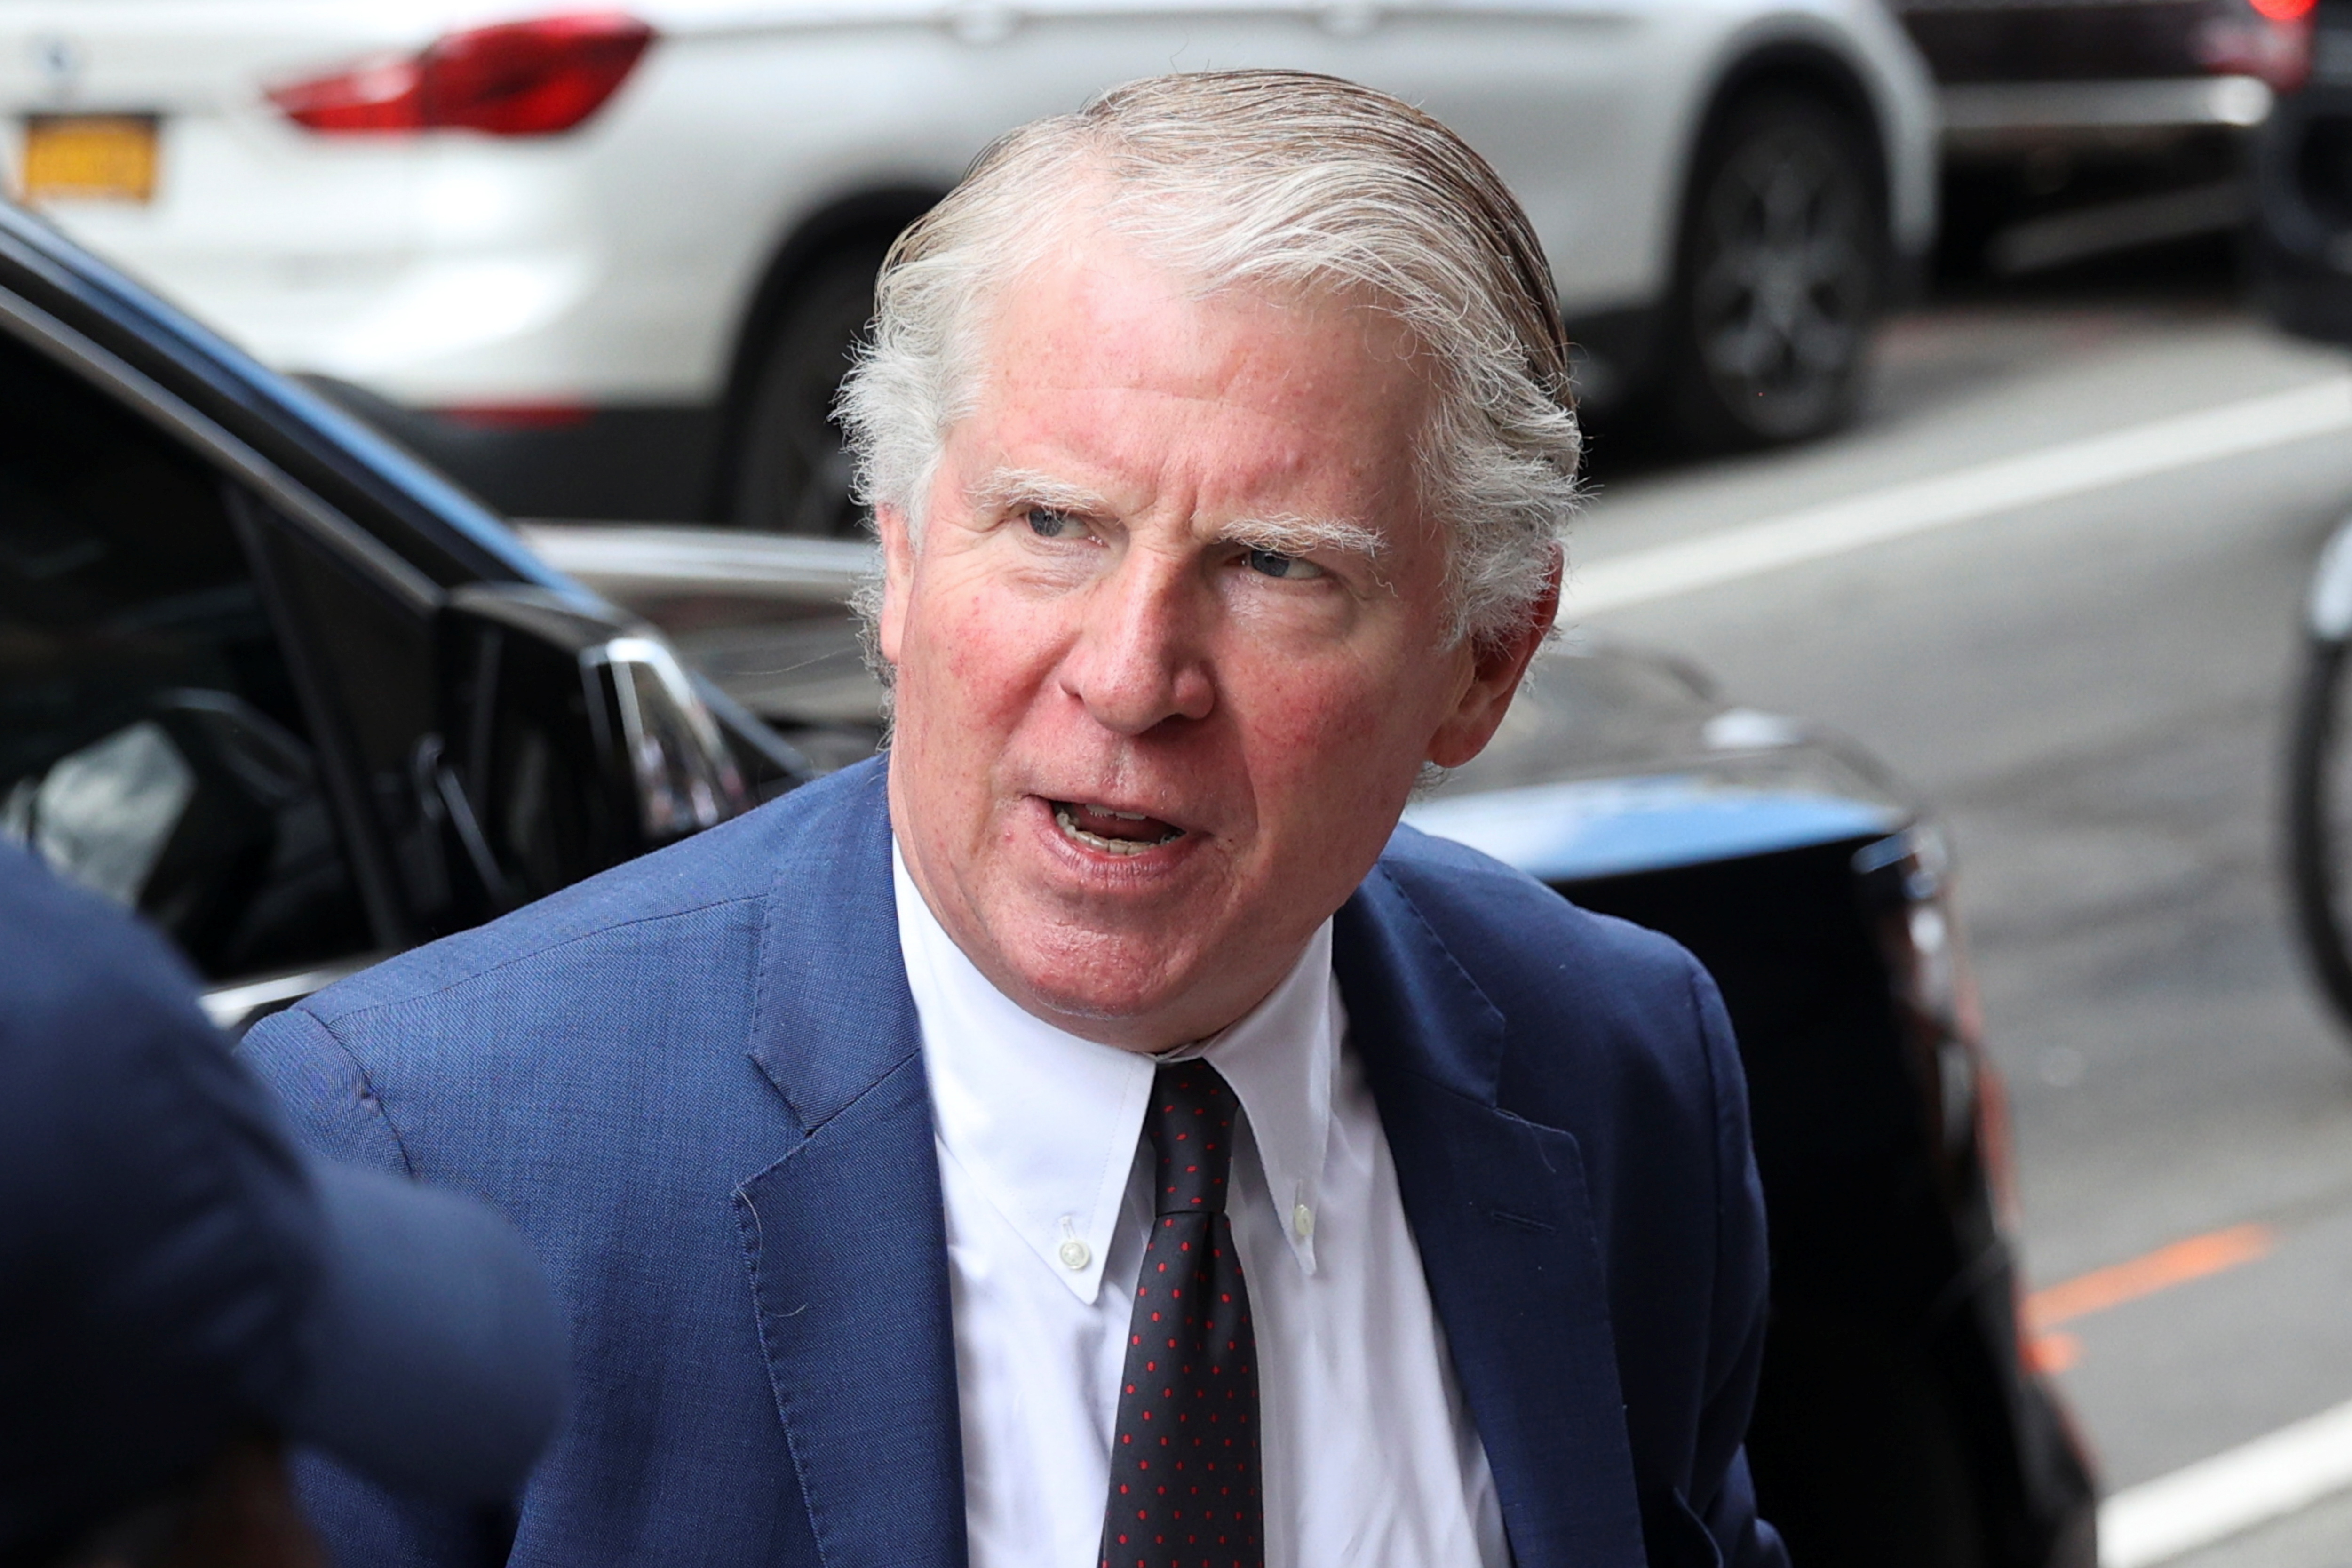 Manhattan district Attorney Cyrus Vance Jr. arrives at the District Attorney’s Office in the Manhattan Borough of New York